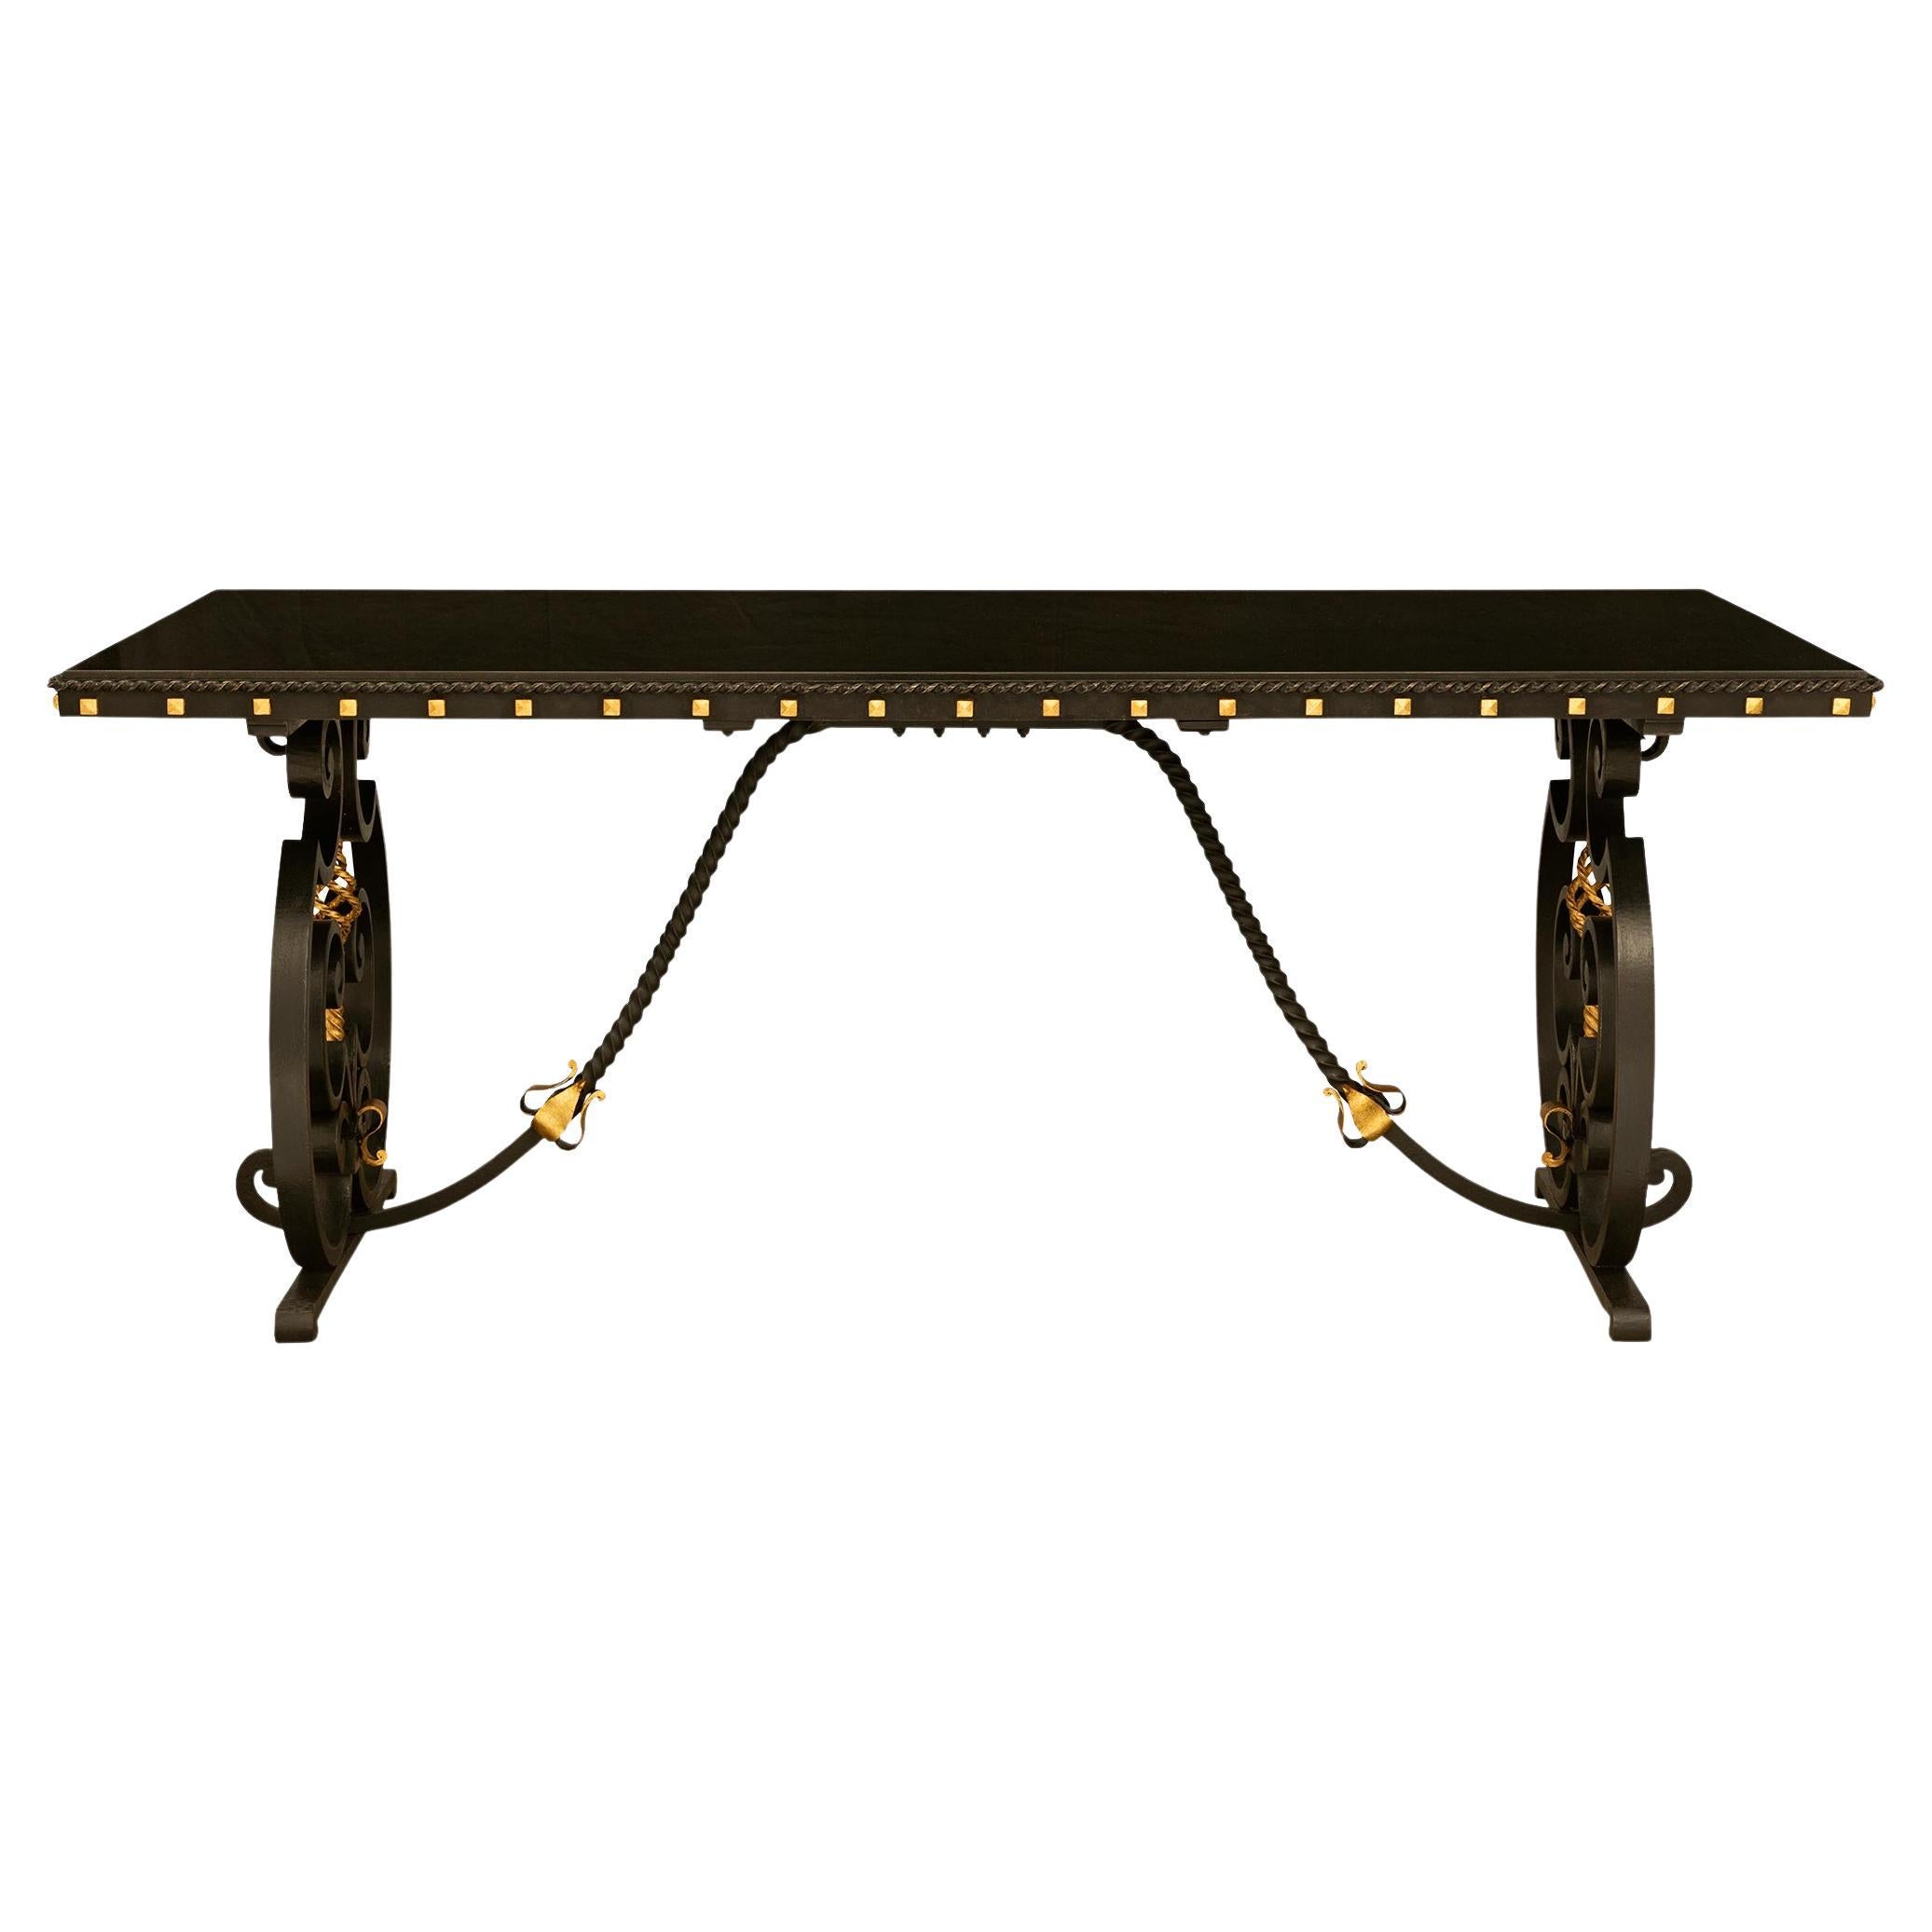 A French 19th century Wrought Iron and Gilt center table